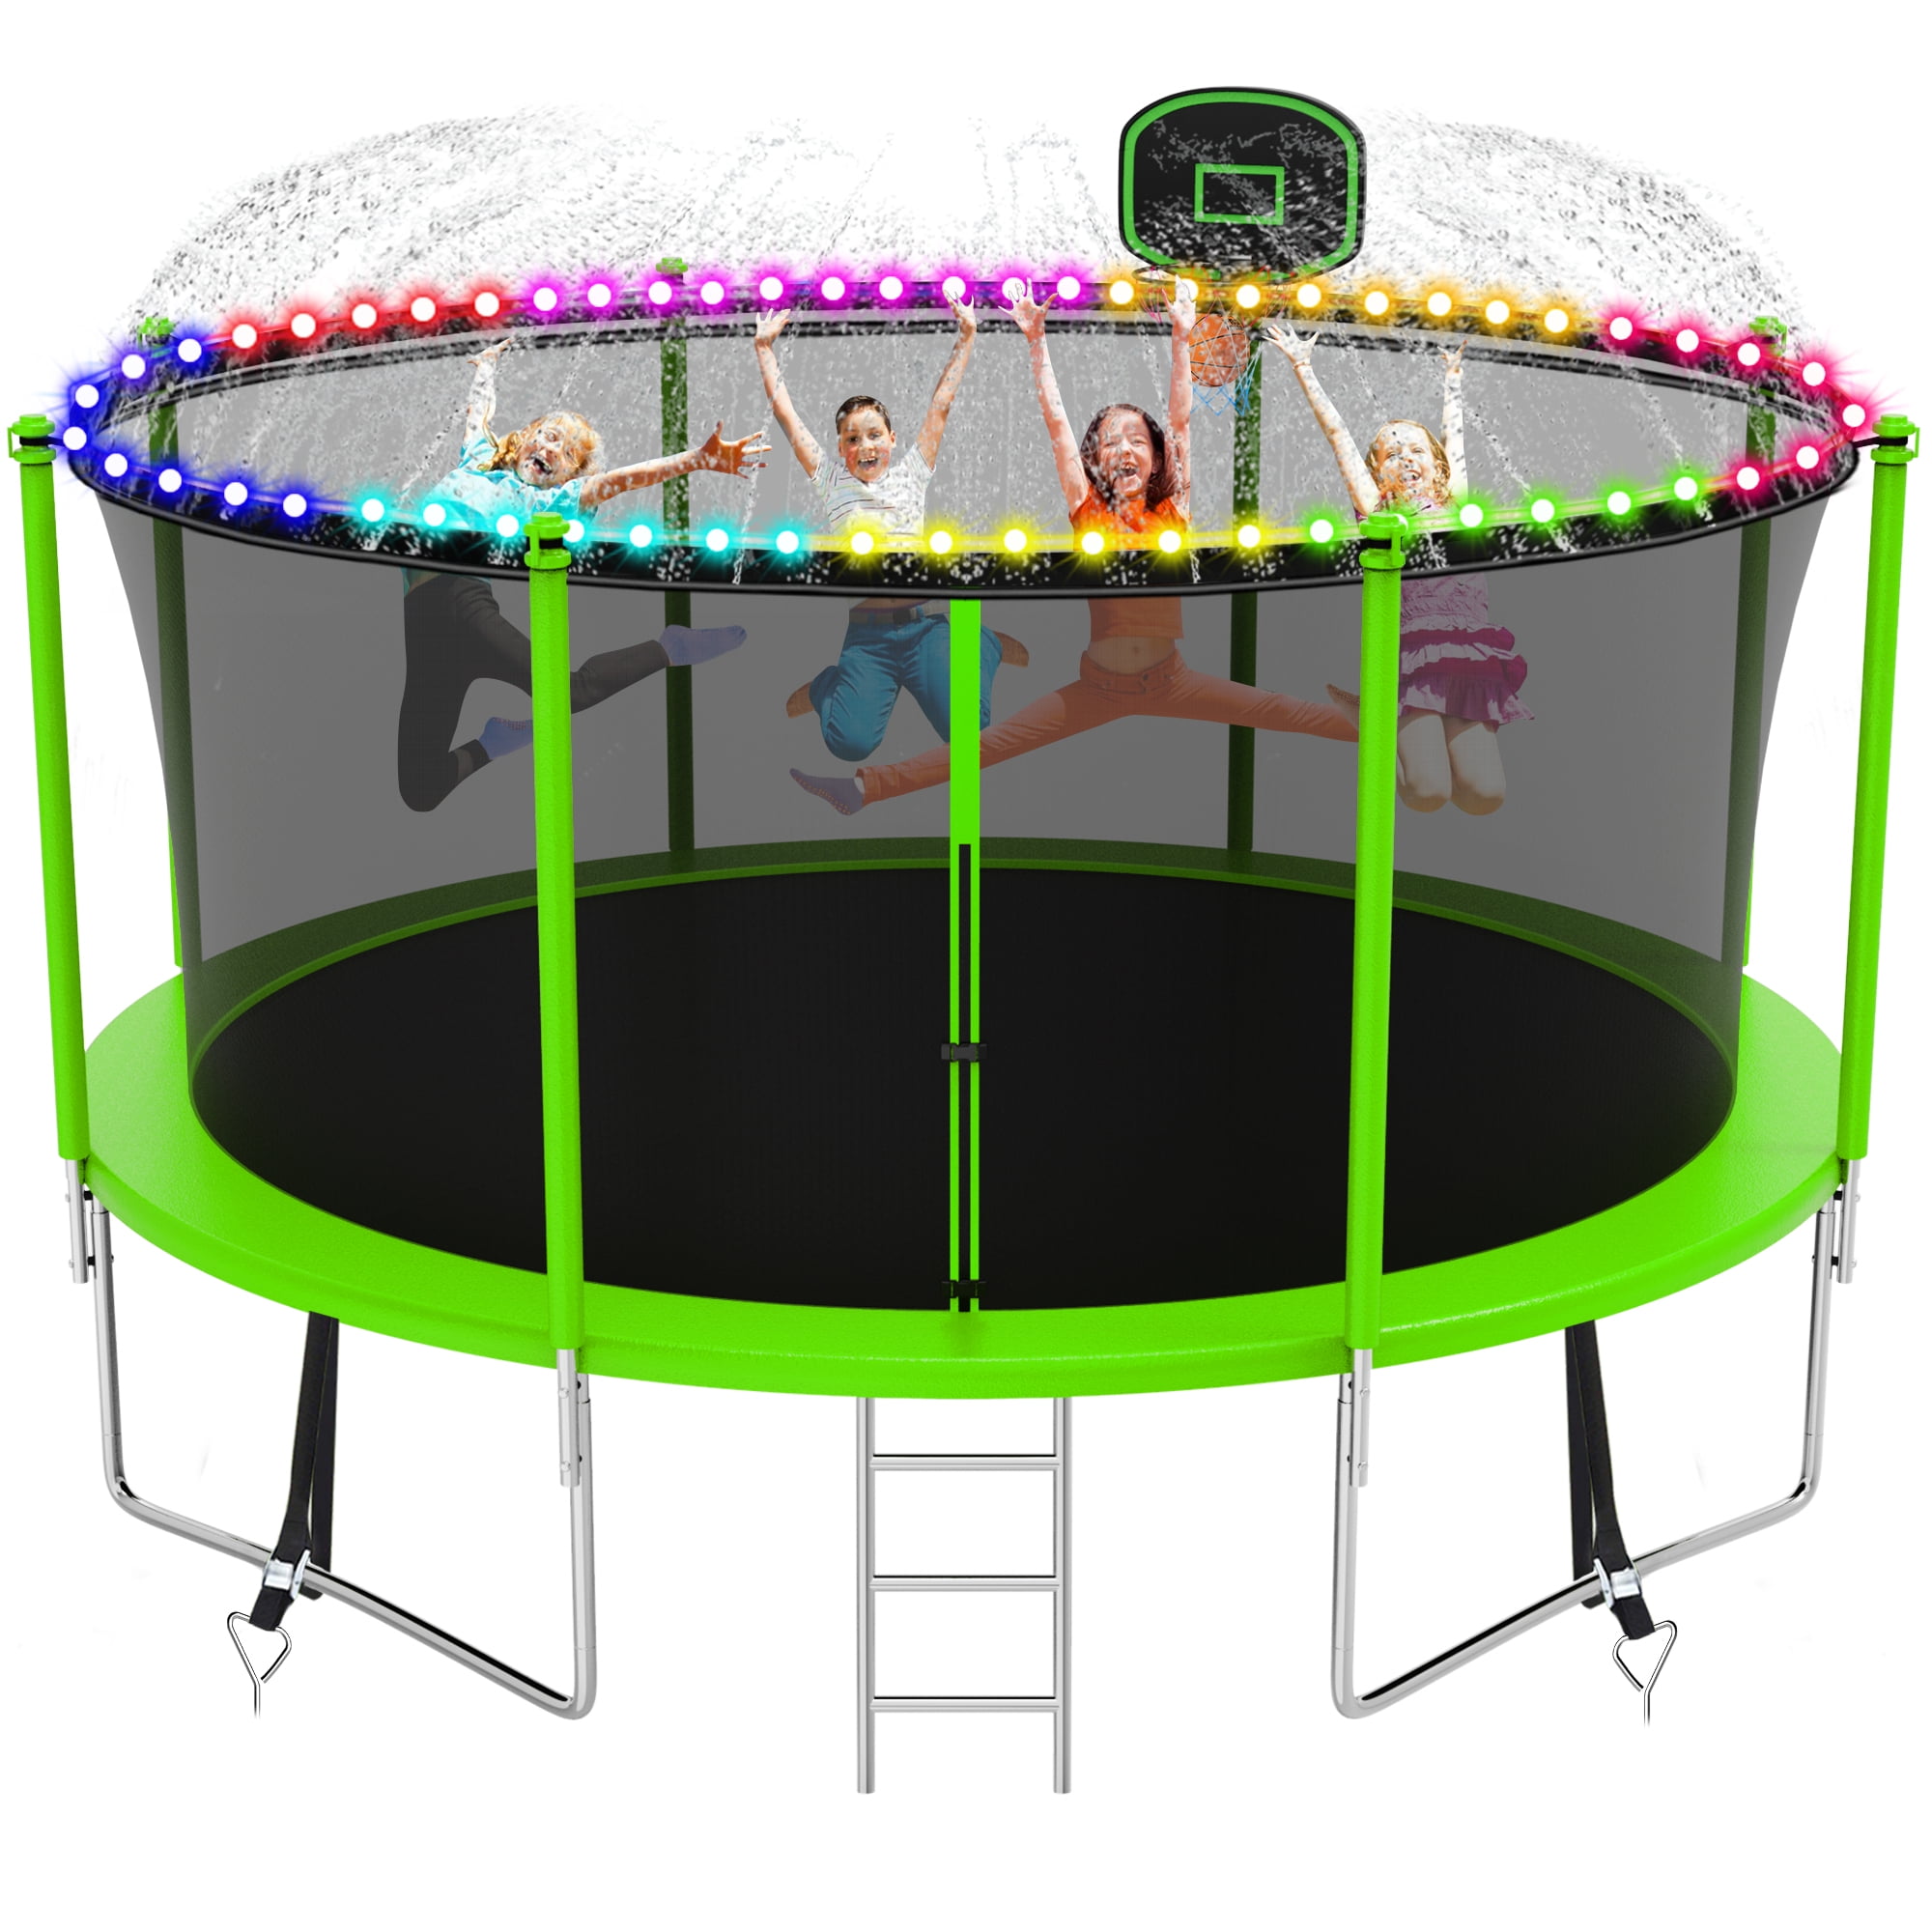 Kacho 1400LBS for Kids Adults Trampoline Sprinkler LED Lights, Outdoor Recreational Trampolines with Safety Enclosure Net Ladder, Fully Galvanized Anti-Rust Blue - Walmart.com